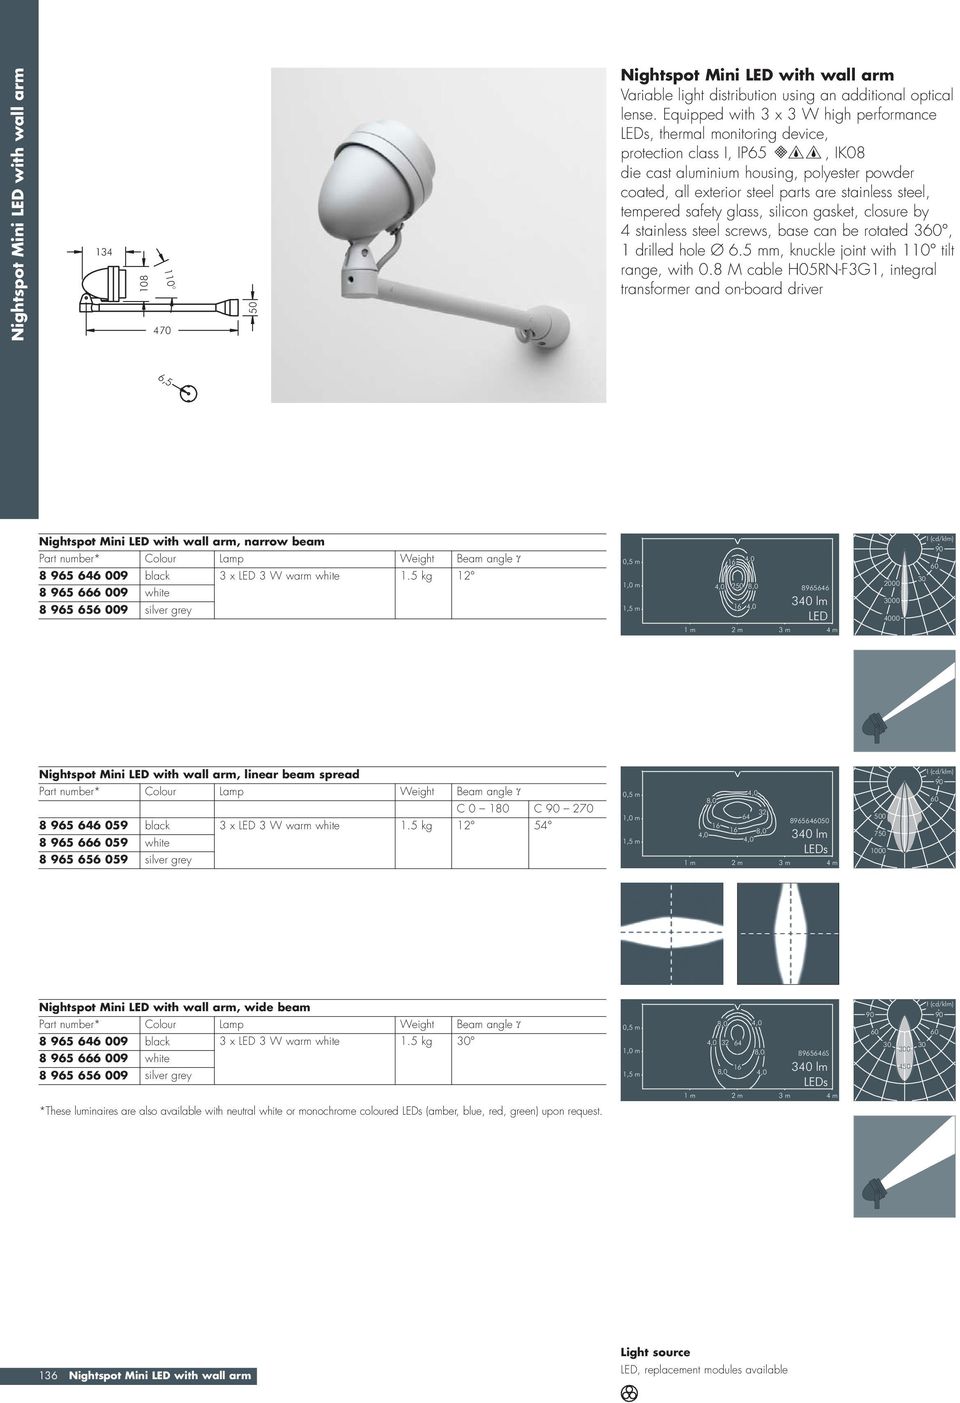 steel, tempered safety glass, silicon gasket, closure by 4 stainless steel screws, base can be rotated 3, 1 drilled hole Ø 6.m, knuckle joint with 110 tilt range, with 0.